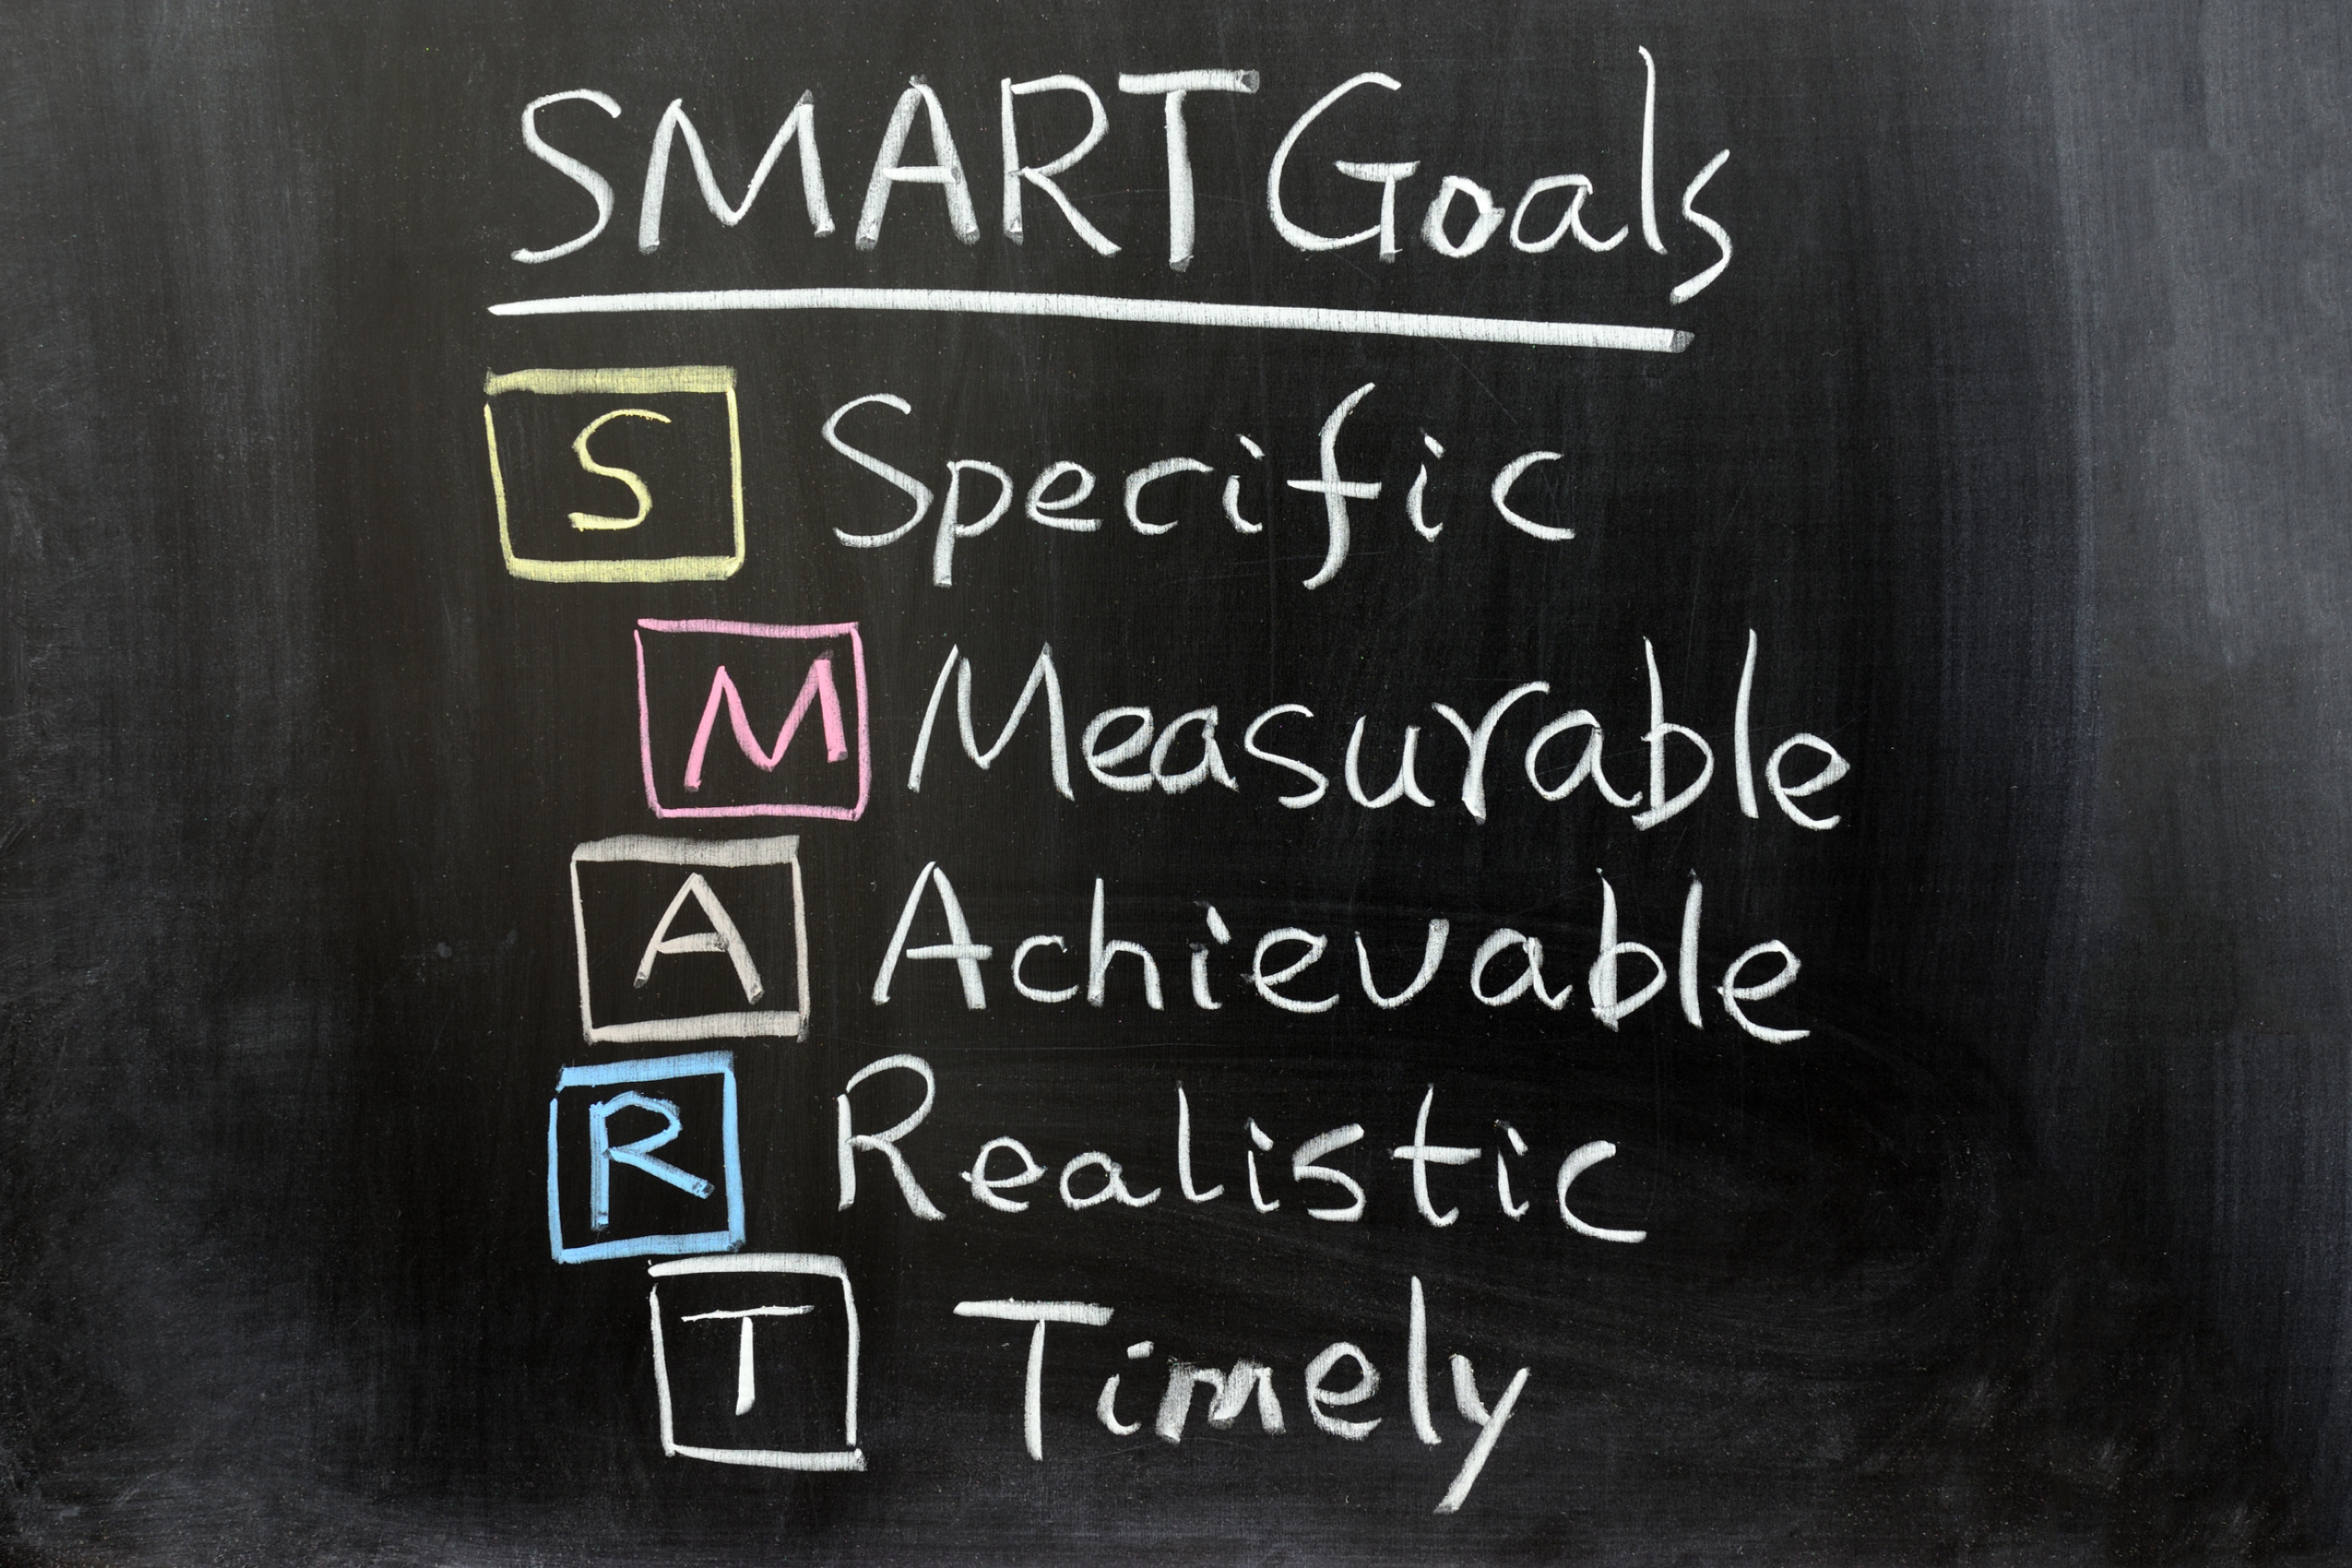 Activate your vision board SMART Goals Chart